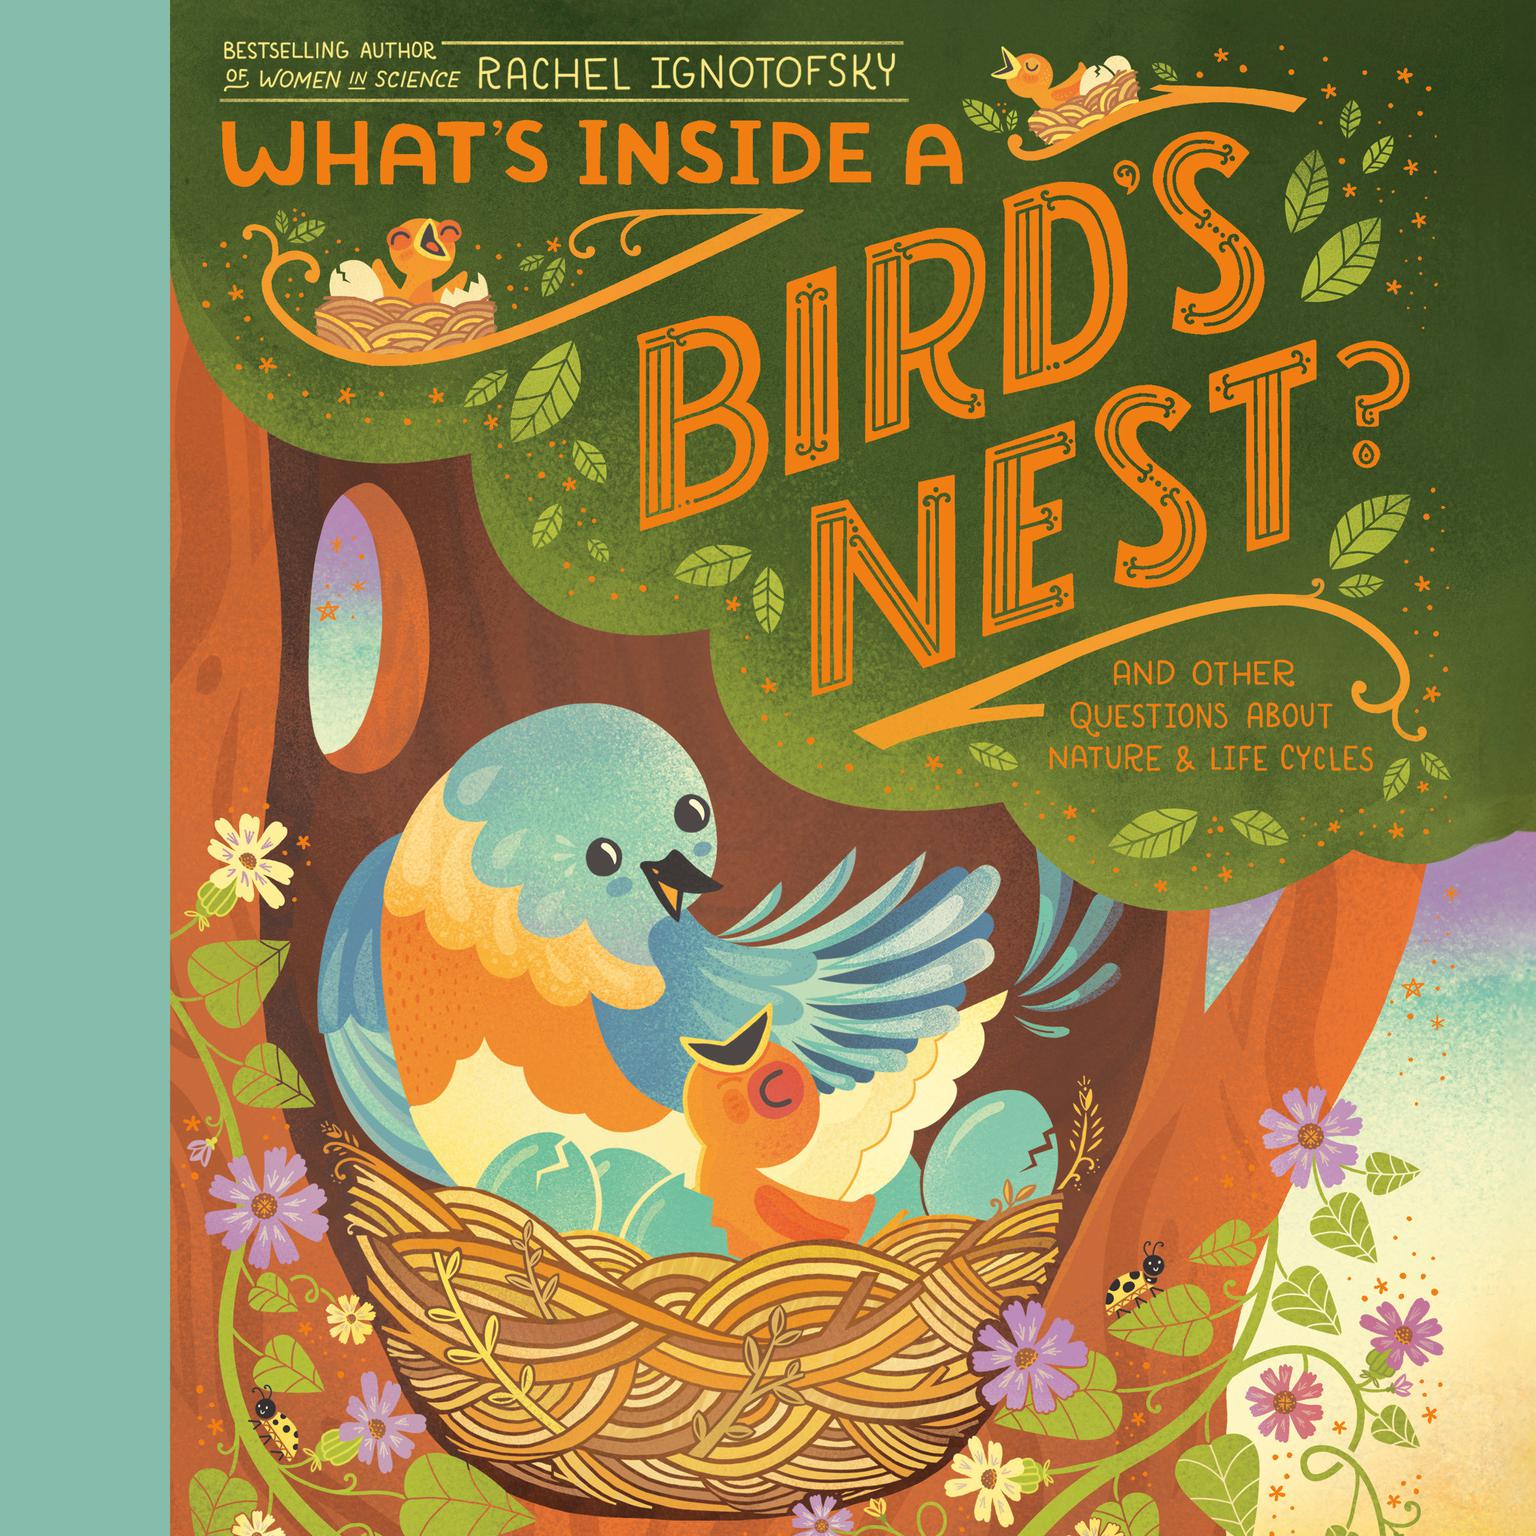 Whats Inside A Birds Nest?: And Other Questions About Nature & Life Cycles Audiobook, by Rachel Ignotofsky